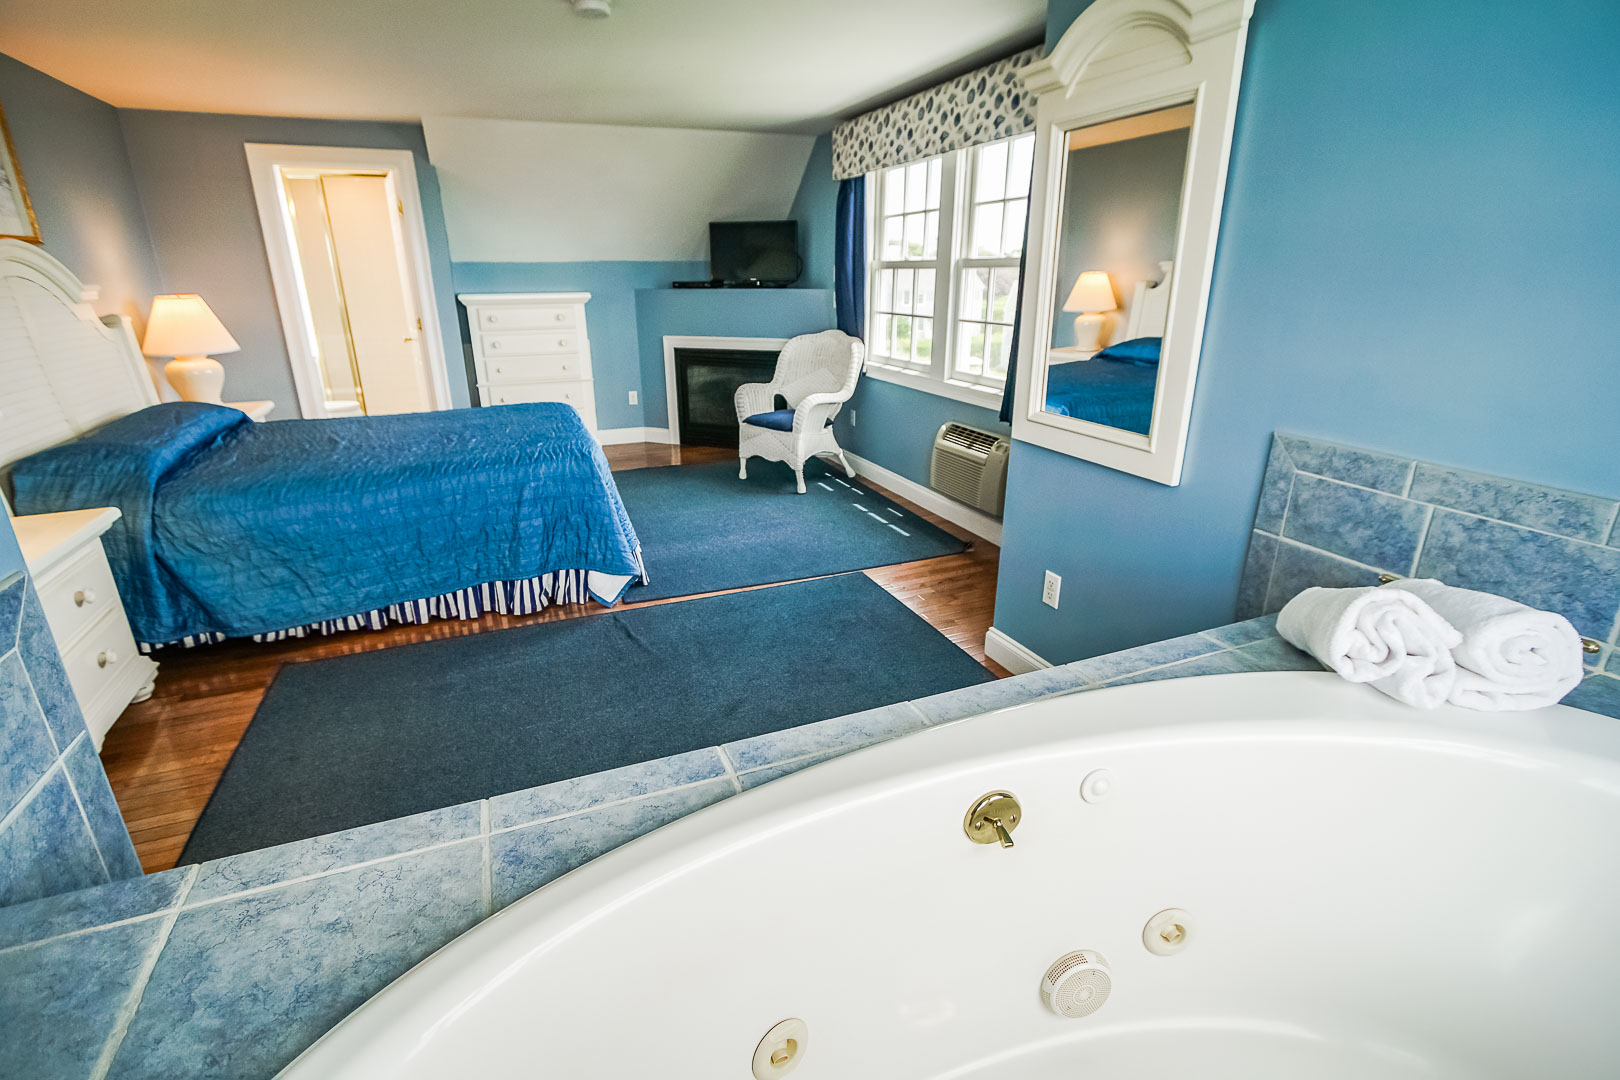 A spacious master bedroom with a jacuzzi tub at VRI's Beachside Village Resort in Massachusetts.